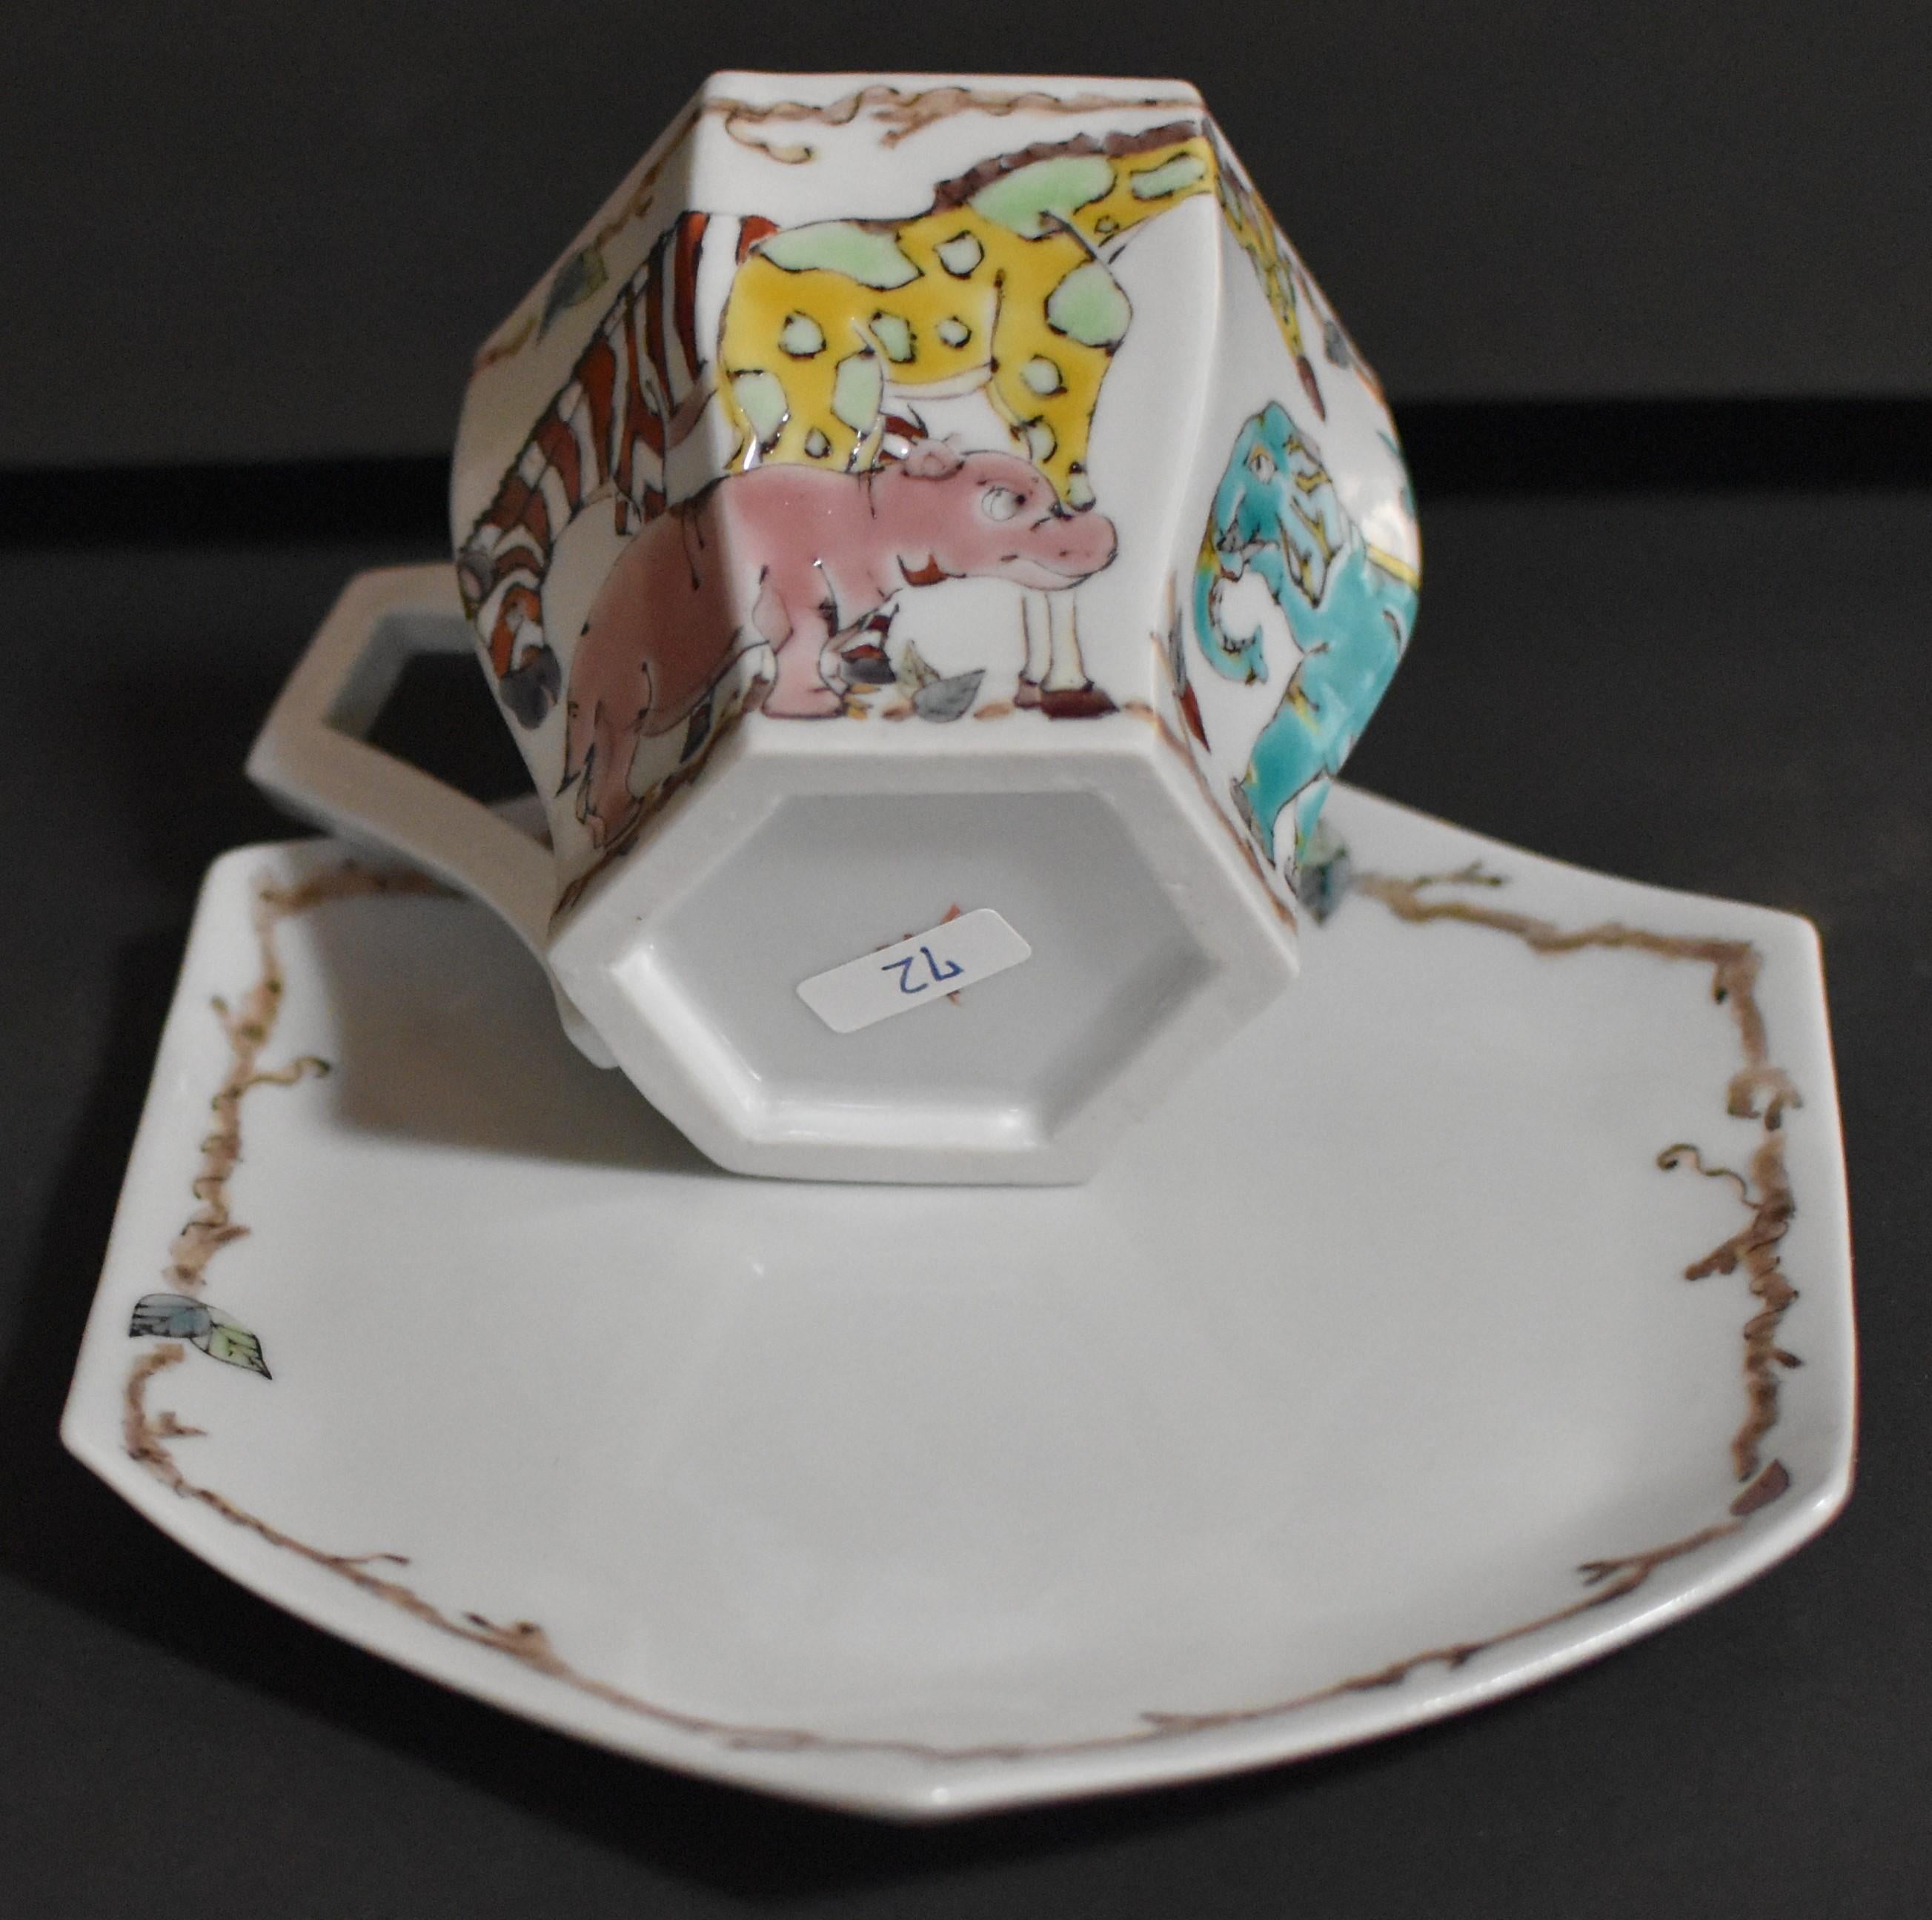 Contemporary Japanese Kutani handcrafted, hand-painted porcelain cup and saucer in a unique hexagonal shape, with a unique interpretation of elephants and other animals.
Having started his career in the venerable tradition of old Kutani porcelain,